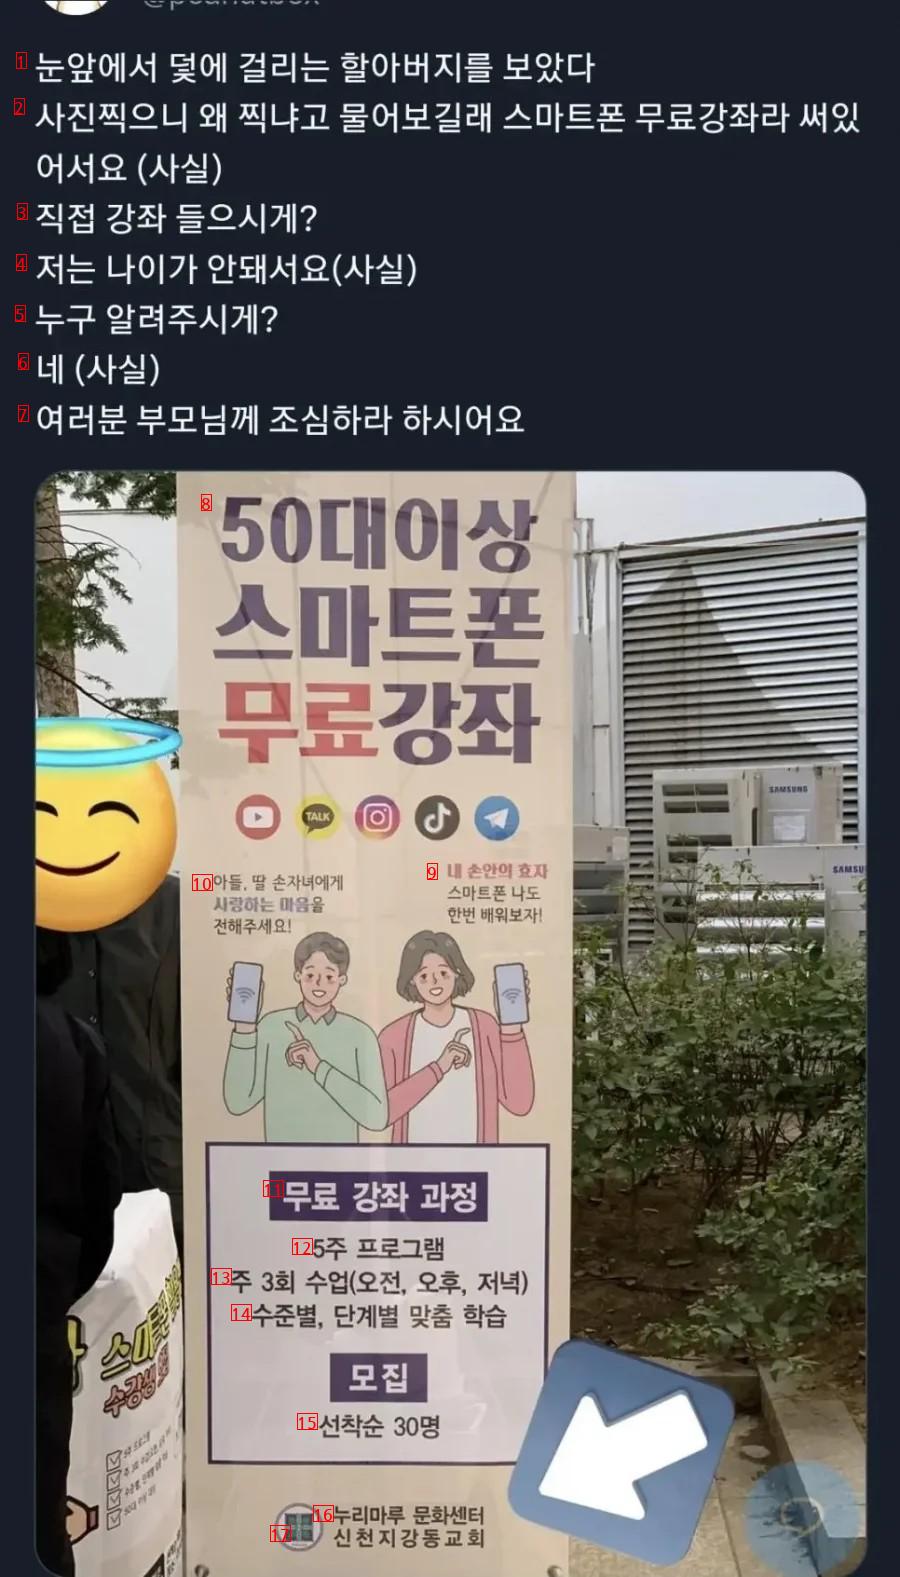 A fake trap tactic aimed at the elderly. ㄷㄷpjpg